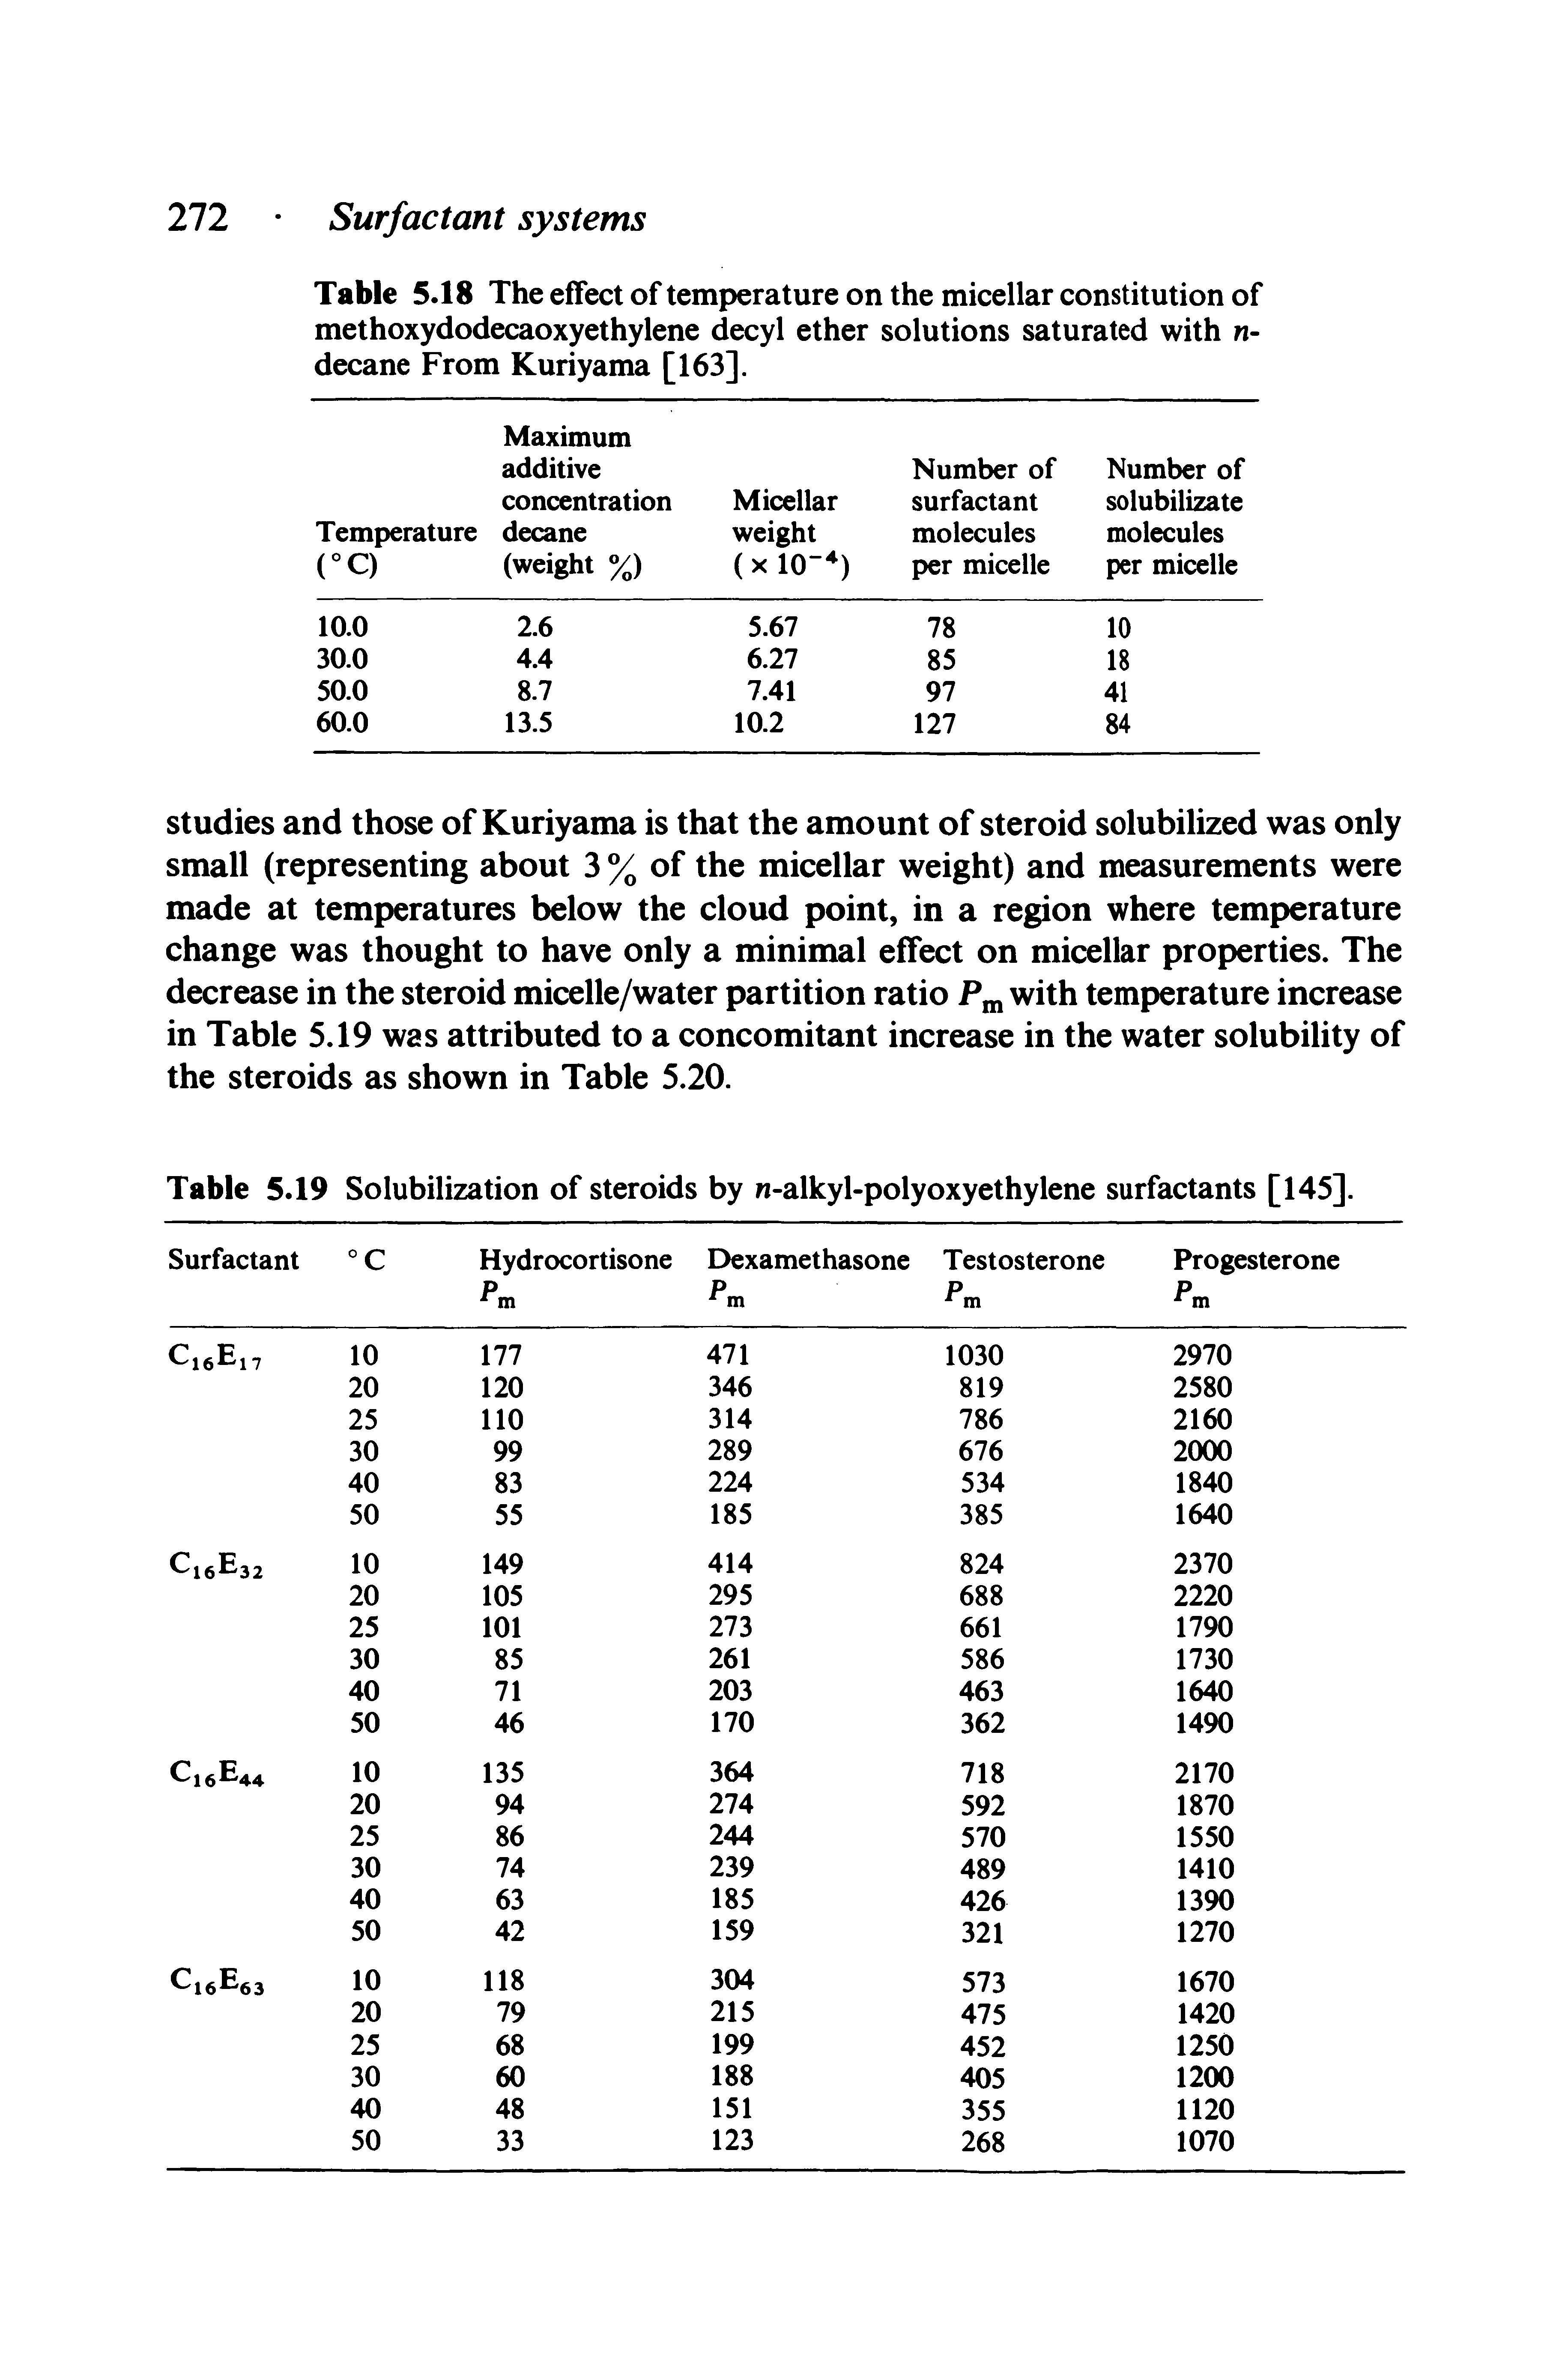 Table 5.19 Solubilization of steroids by n-alkyl-polyoxyethylene surfactants [145].